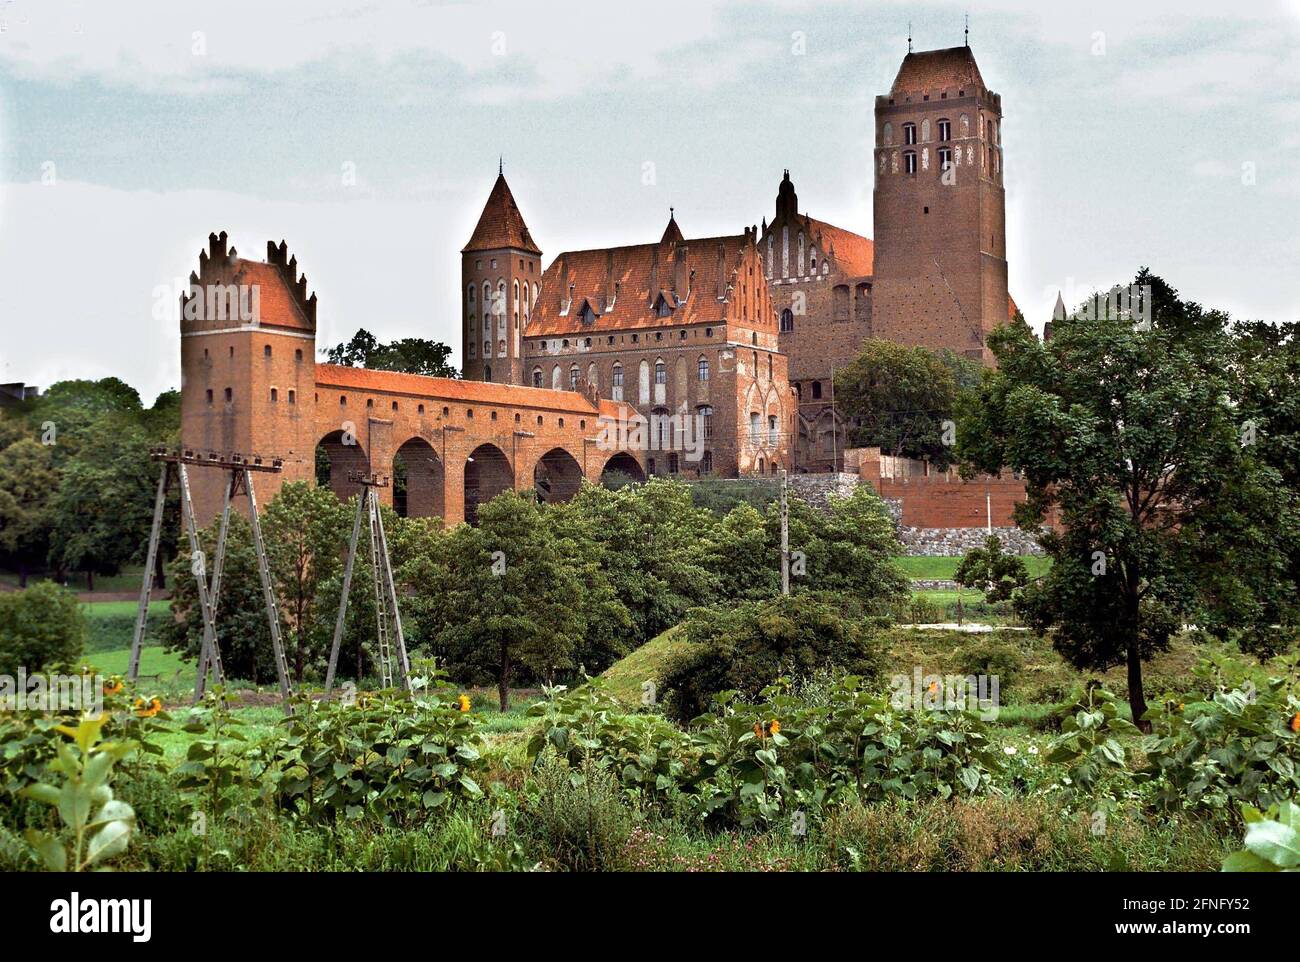 PL / Poland / History / Castles / Castles 7/1993 Marienwerder, old castle of the Teutonic Knights from the time of the German conquest of the East // German Empire / Kujawy / Order of Knights The Order of Knights ruled the place from 1233, after that it was a bishop's seat and Prussian seat of government, since 1945 it belongs to Poland [automated translation] Stock Photo